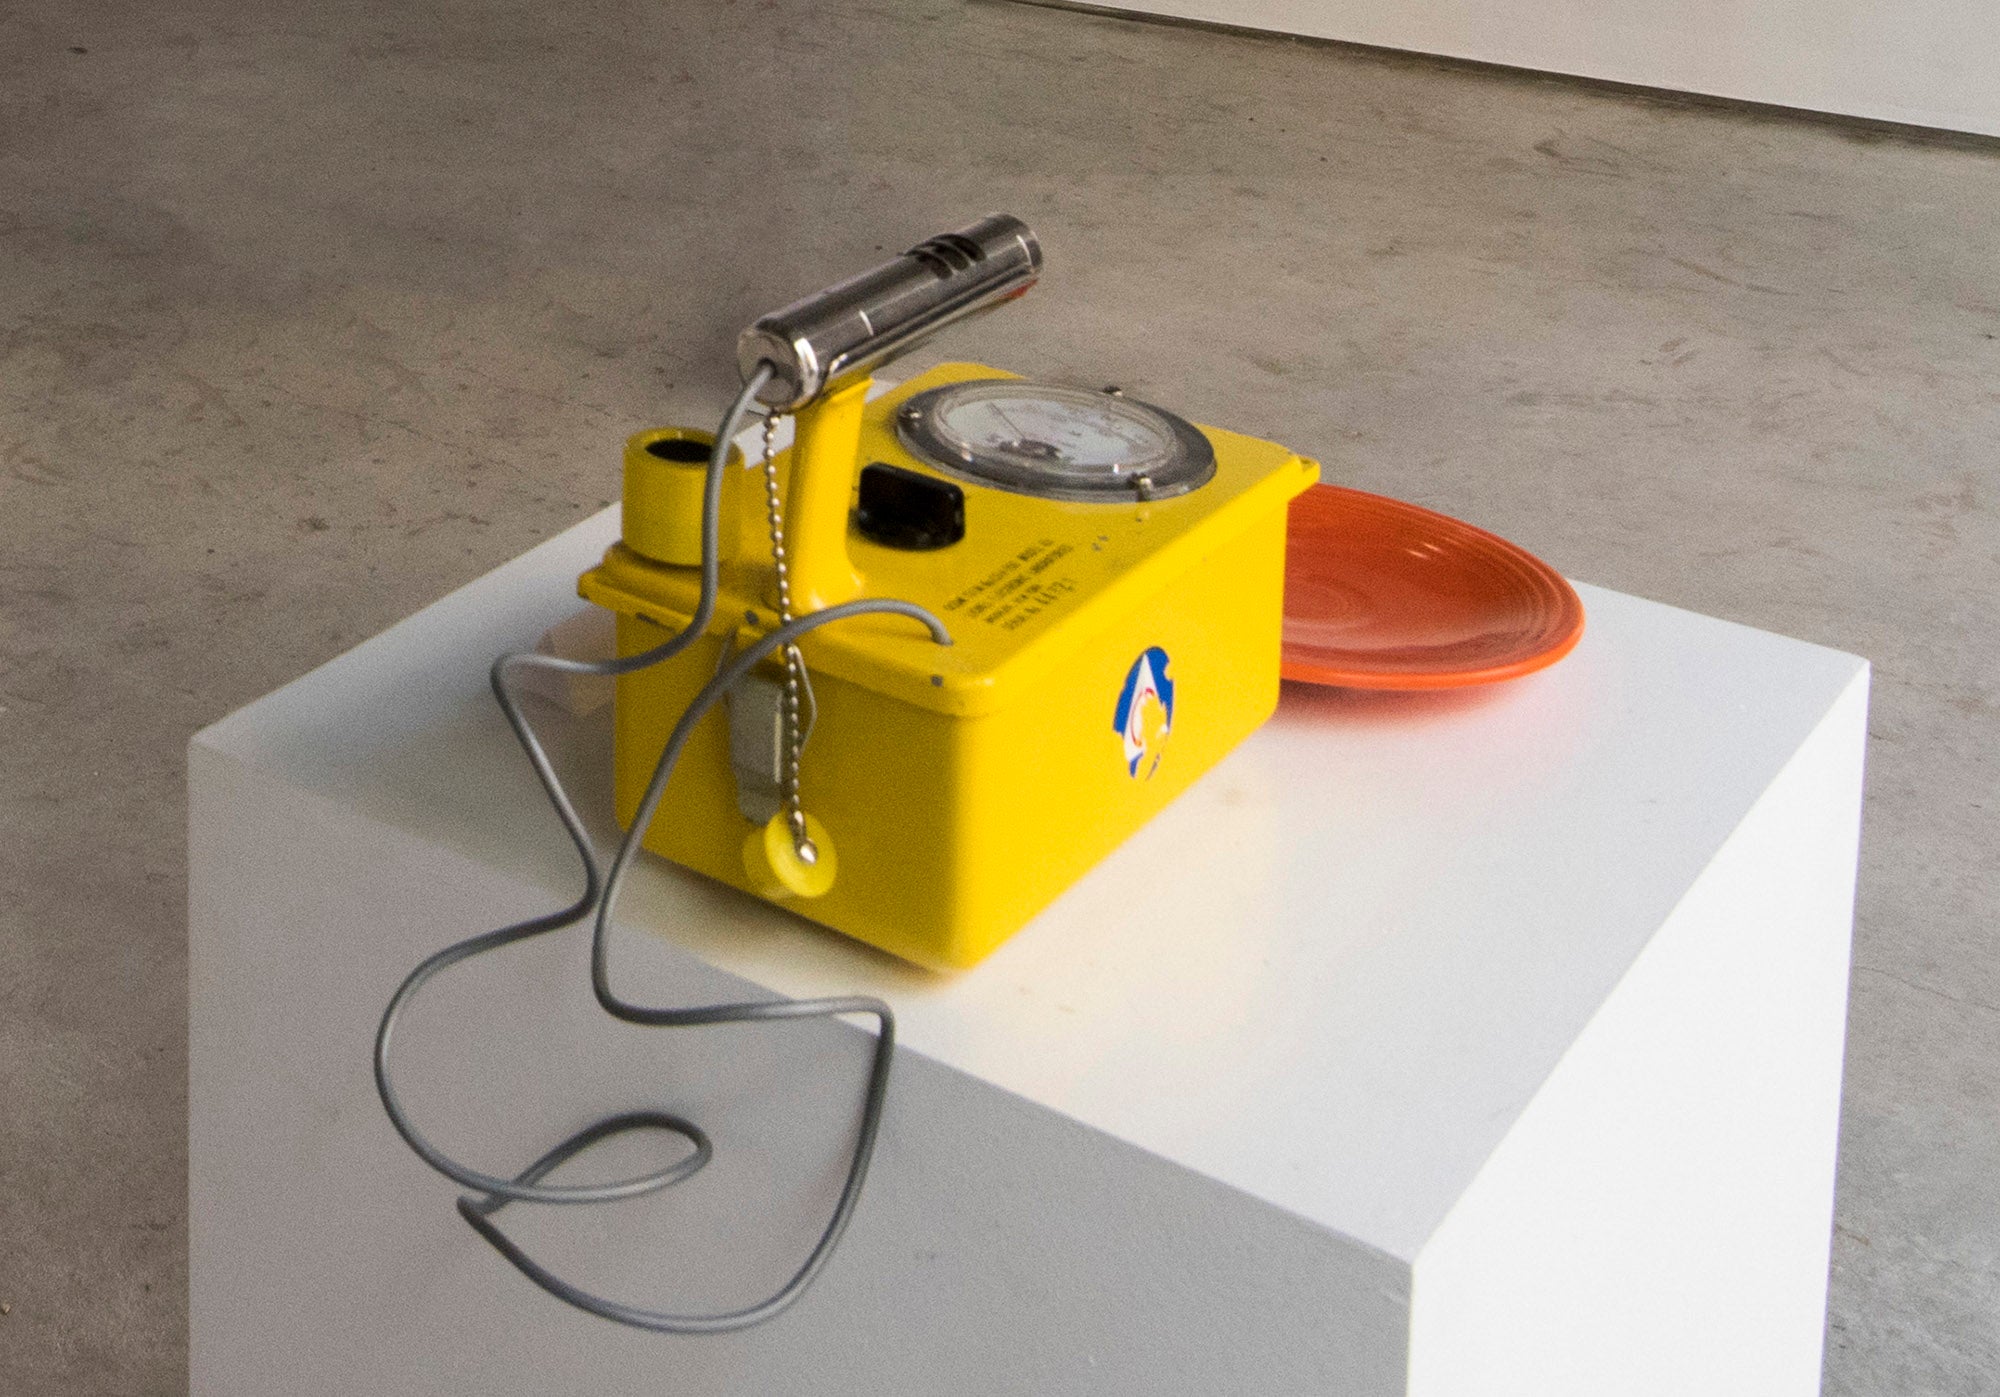 Phil Buehler, "Fire and Fury #2 / Geiger Counter"